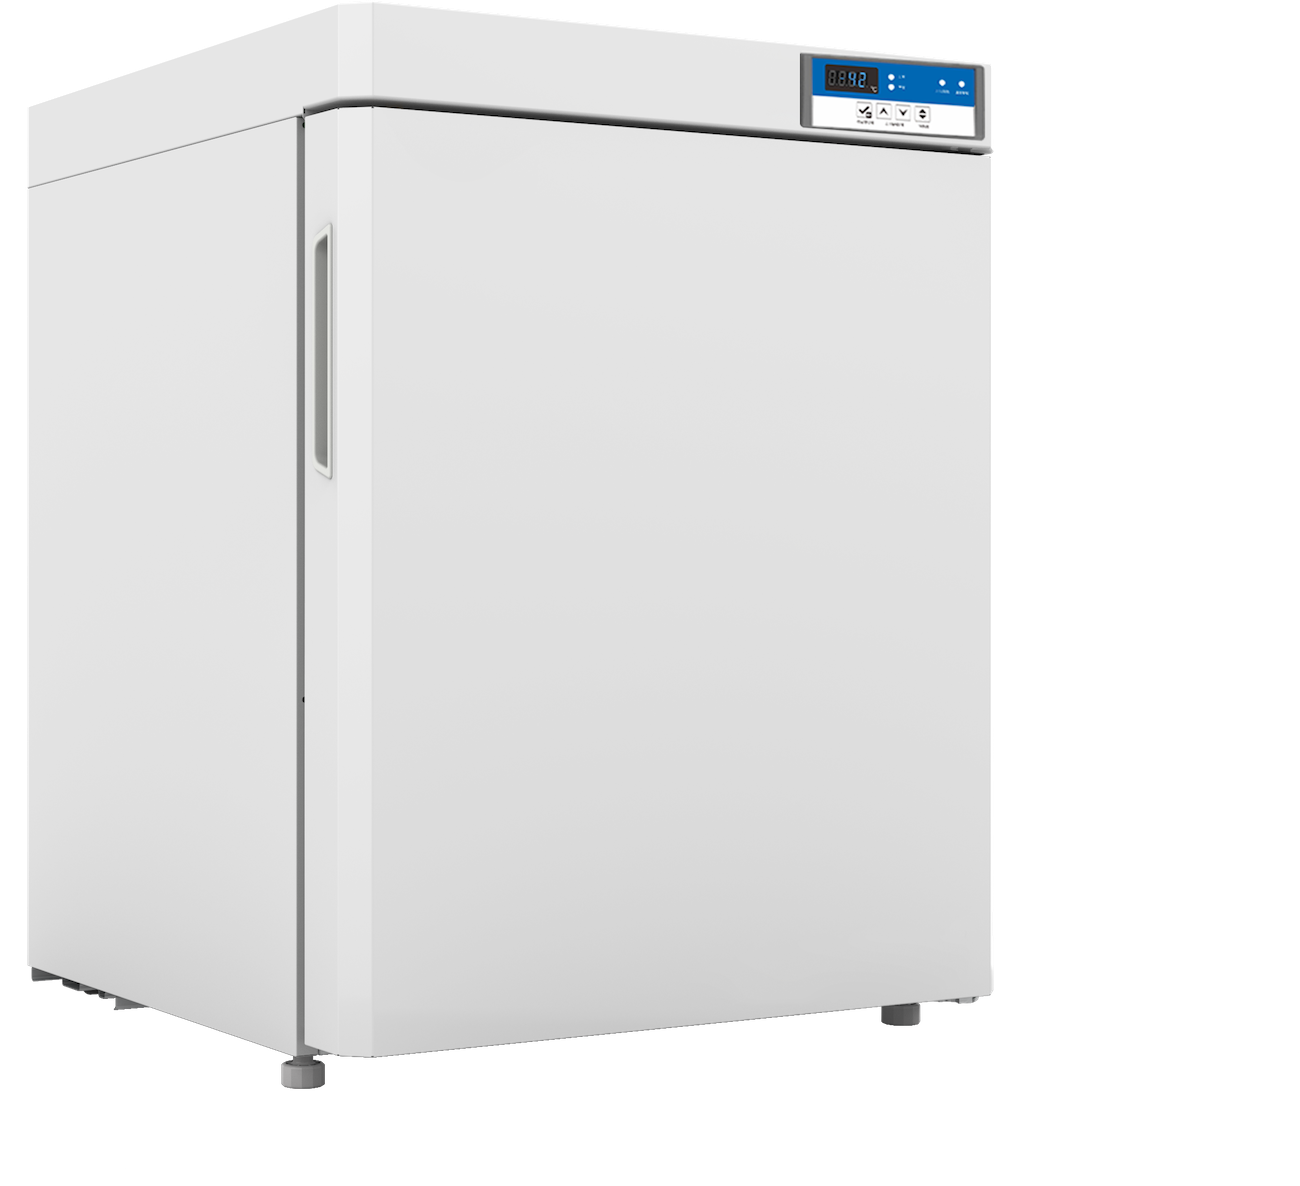 A white under counter medical freezer with a blue panel, handle, and digital temperature display. Suitable for laboratory and medical grade storage.